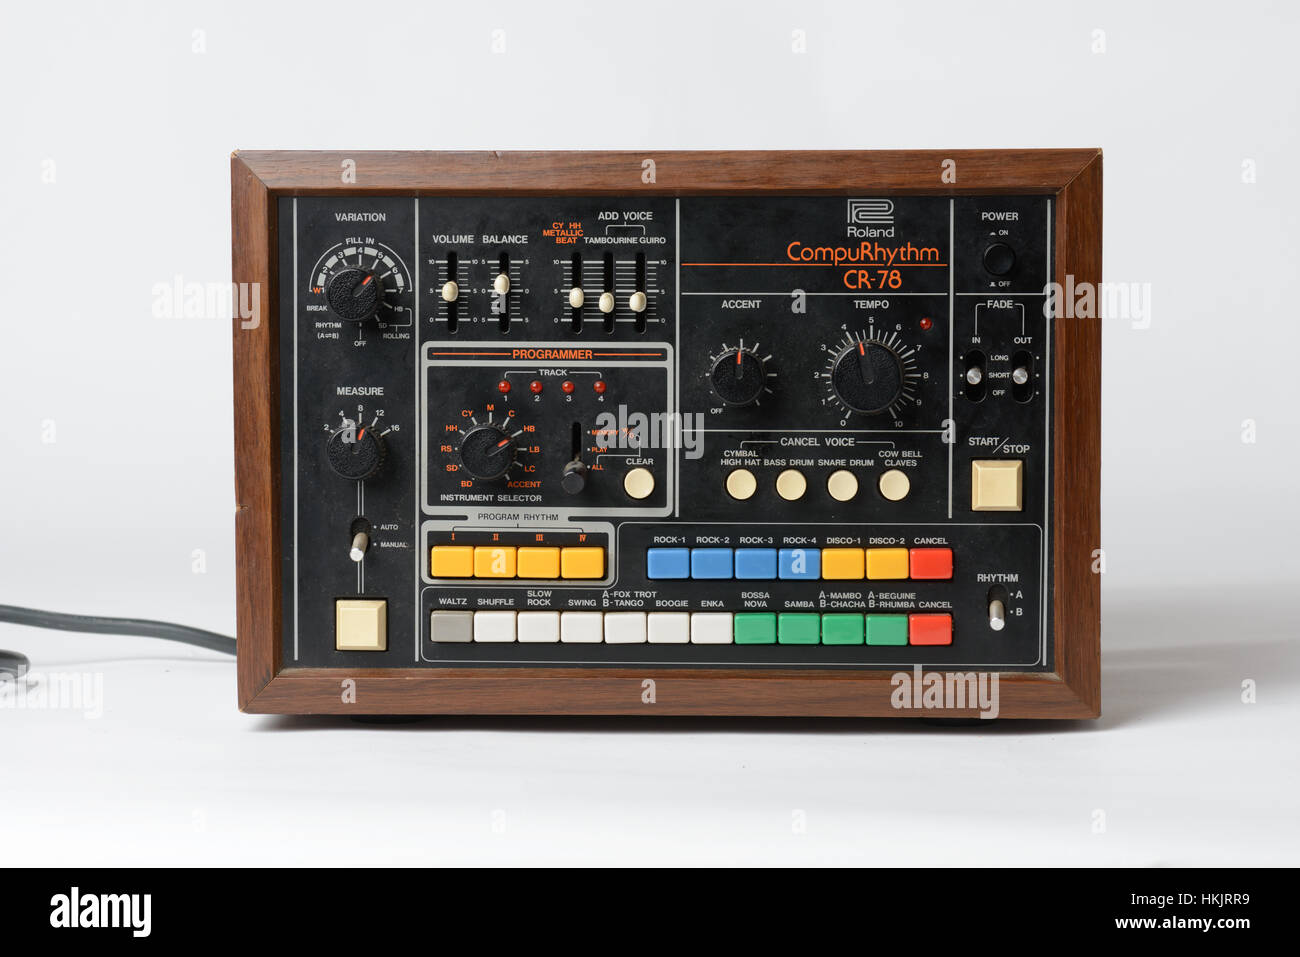 Roland Compurhythm CR-78 drum machine from 1978 in wood effect cabinet as used by artists including Phil Collins, Peter Gabriel and Gary Numan. Stock Photo